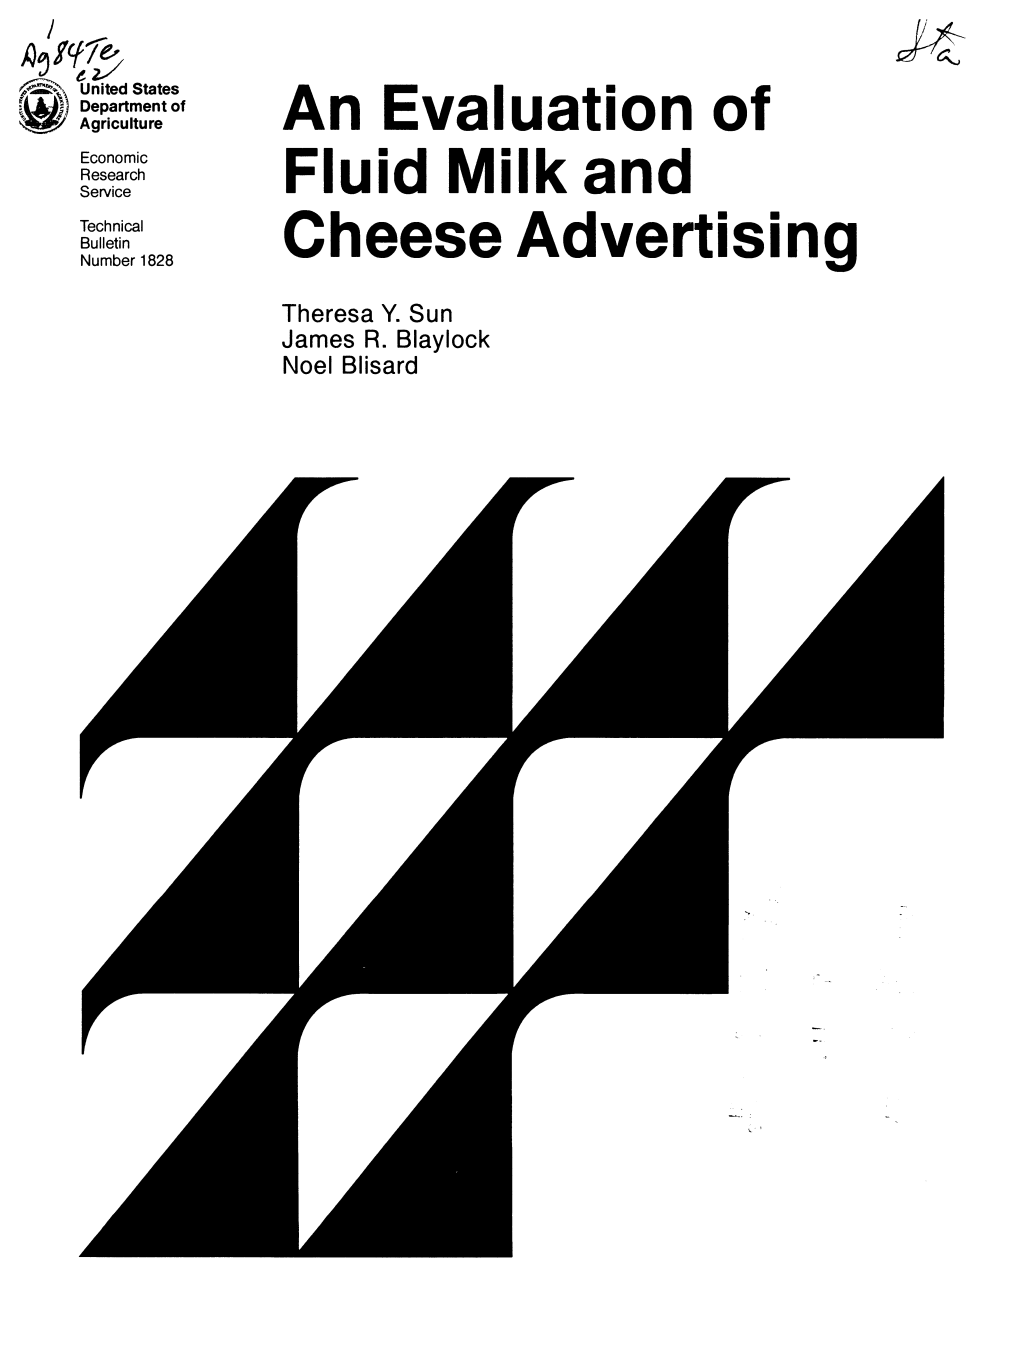 An Evaluation of Fluid Milk and Cheese Advertising (TB-1828)